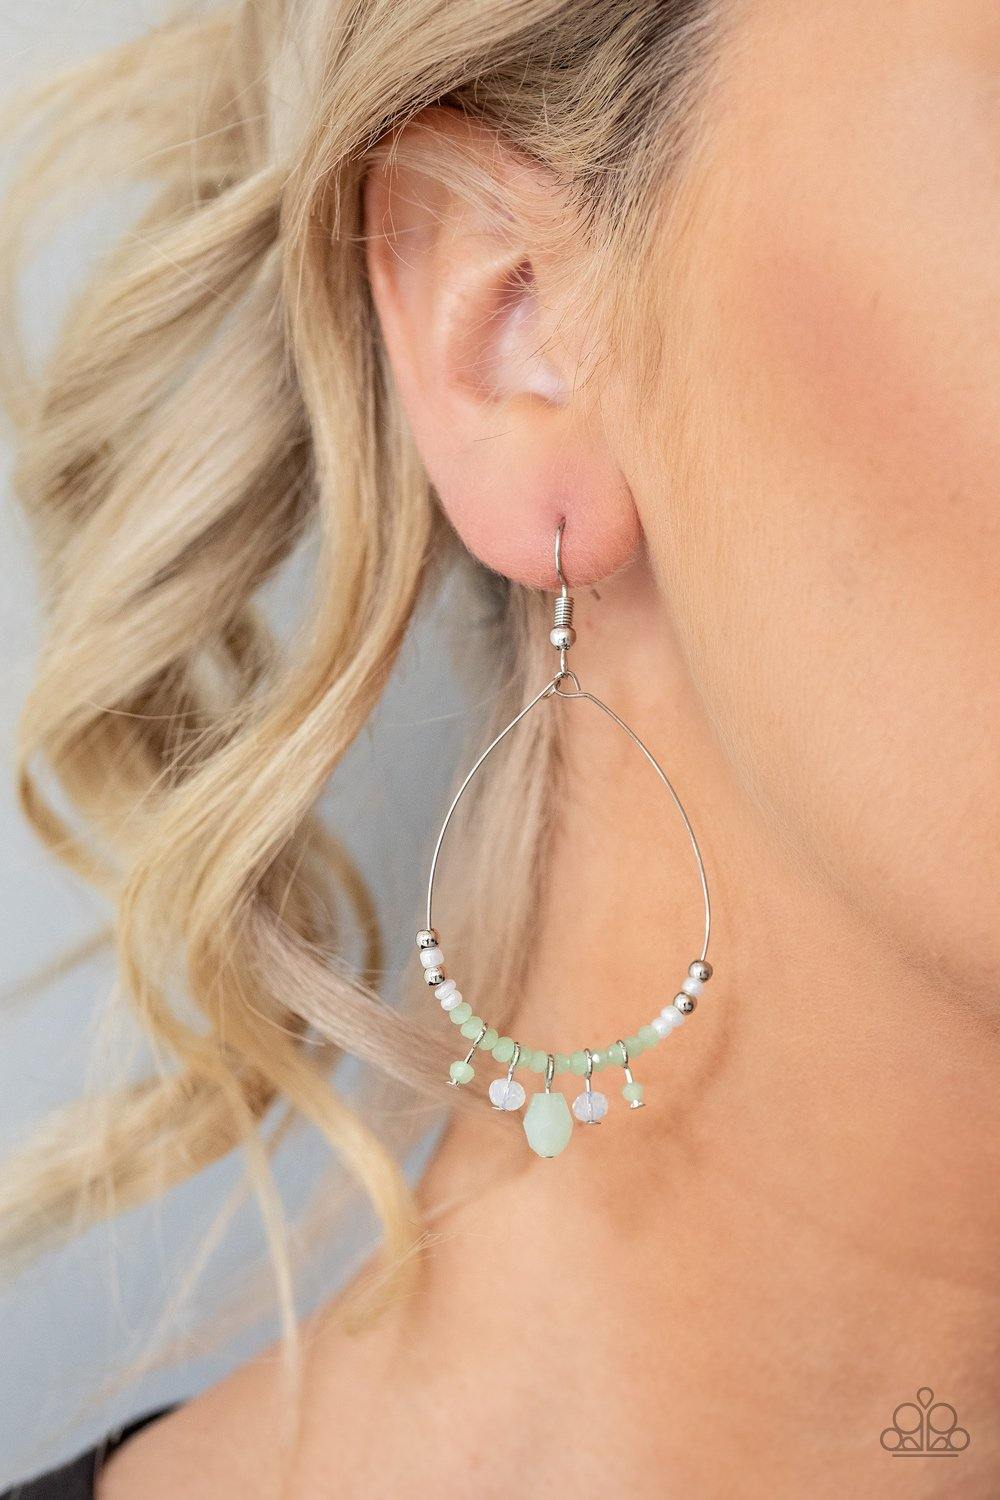 Exquisitely Ethereal - Green Earrings - Paparazzi Accessories - Sassysblingandthings